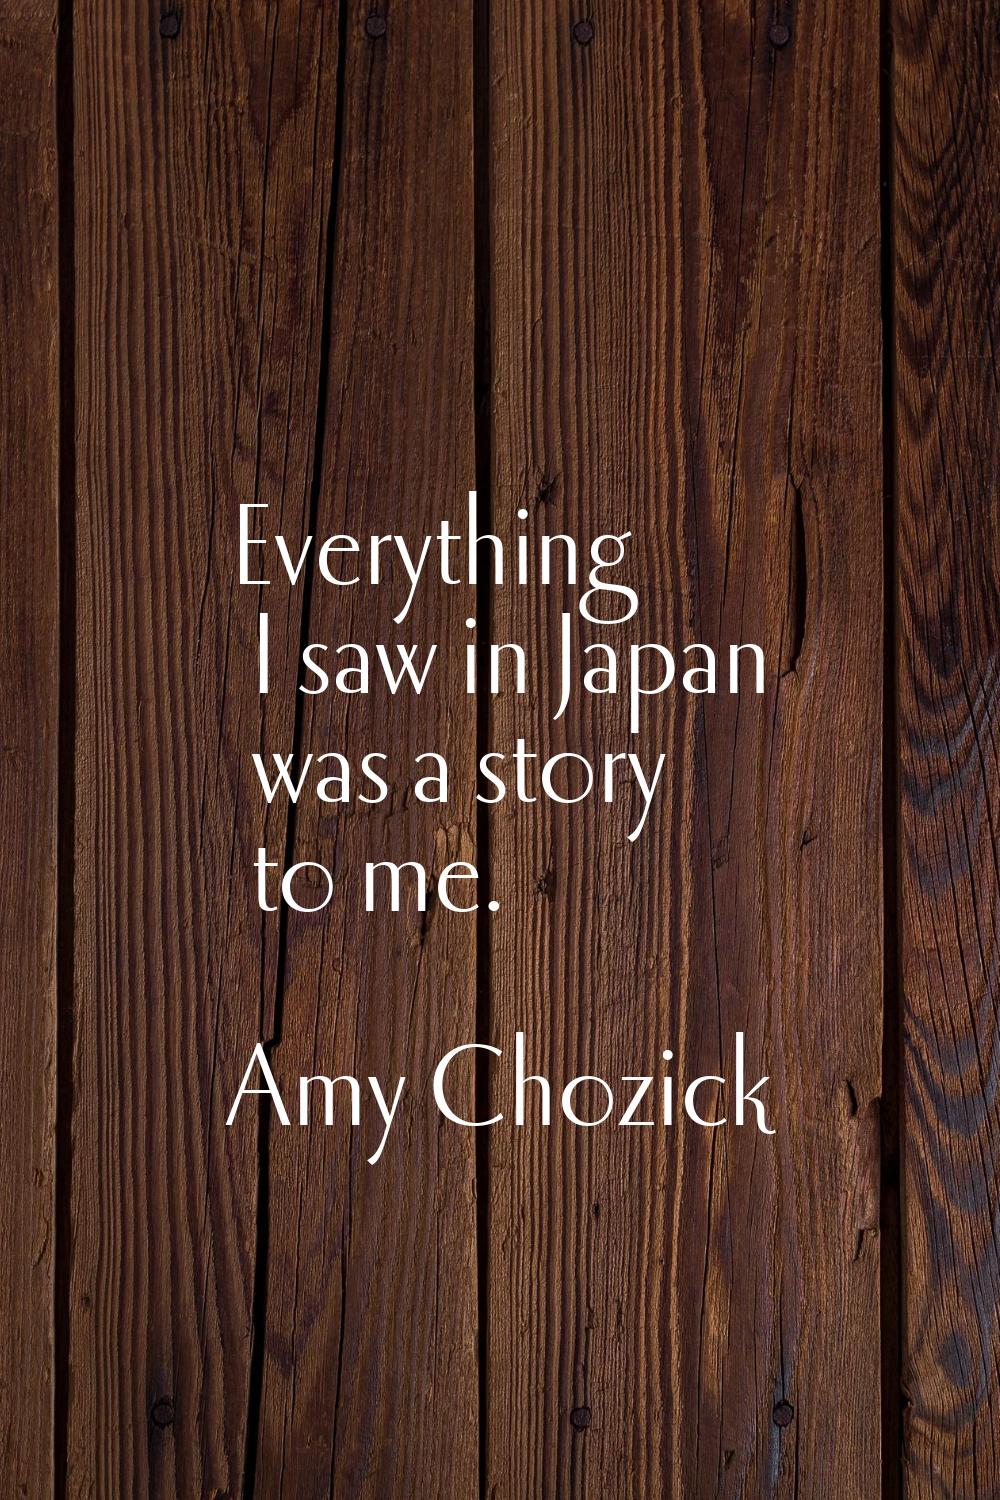 Everything I saw in Japan was a story to me.